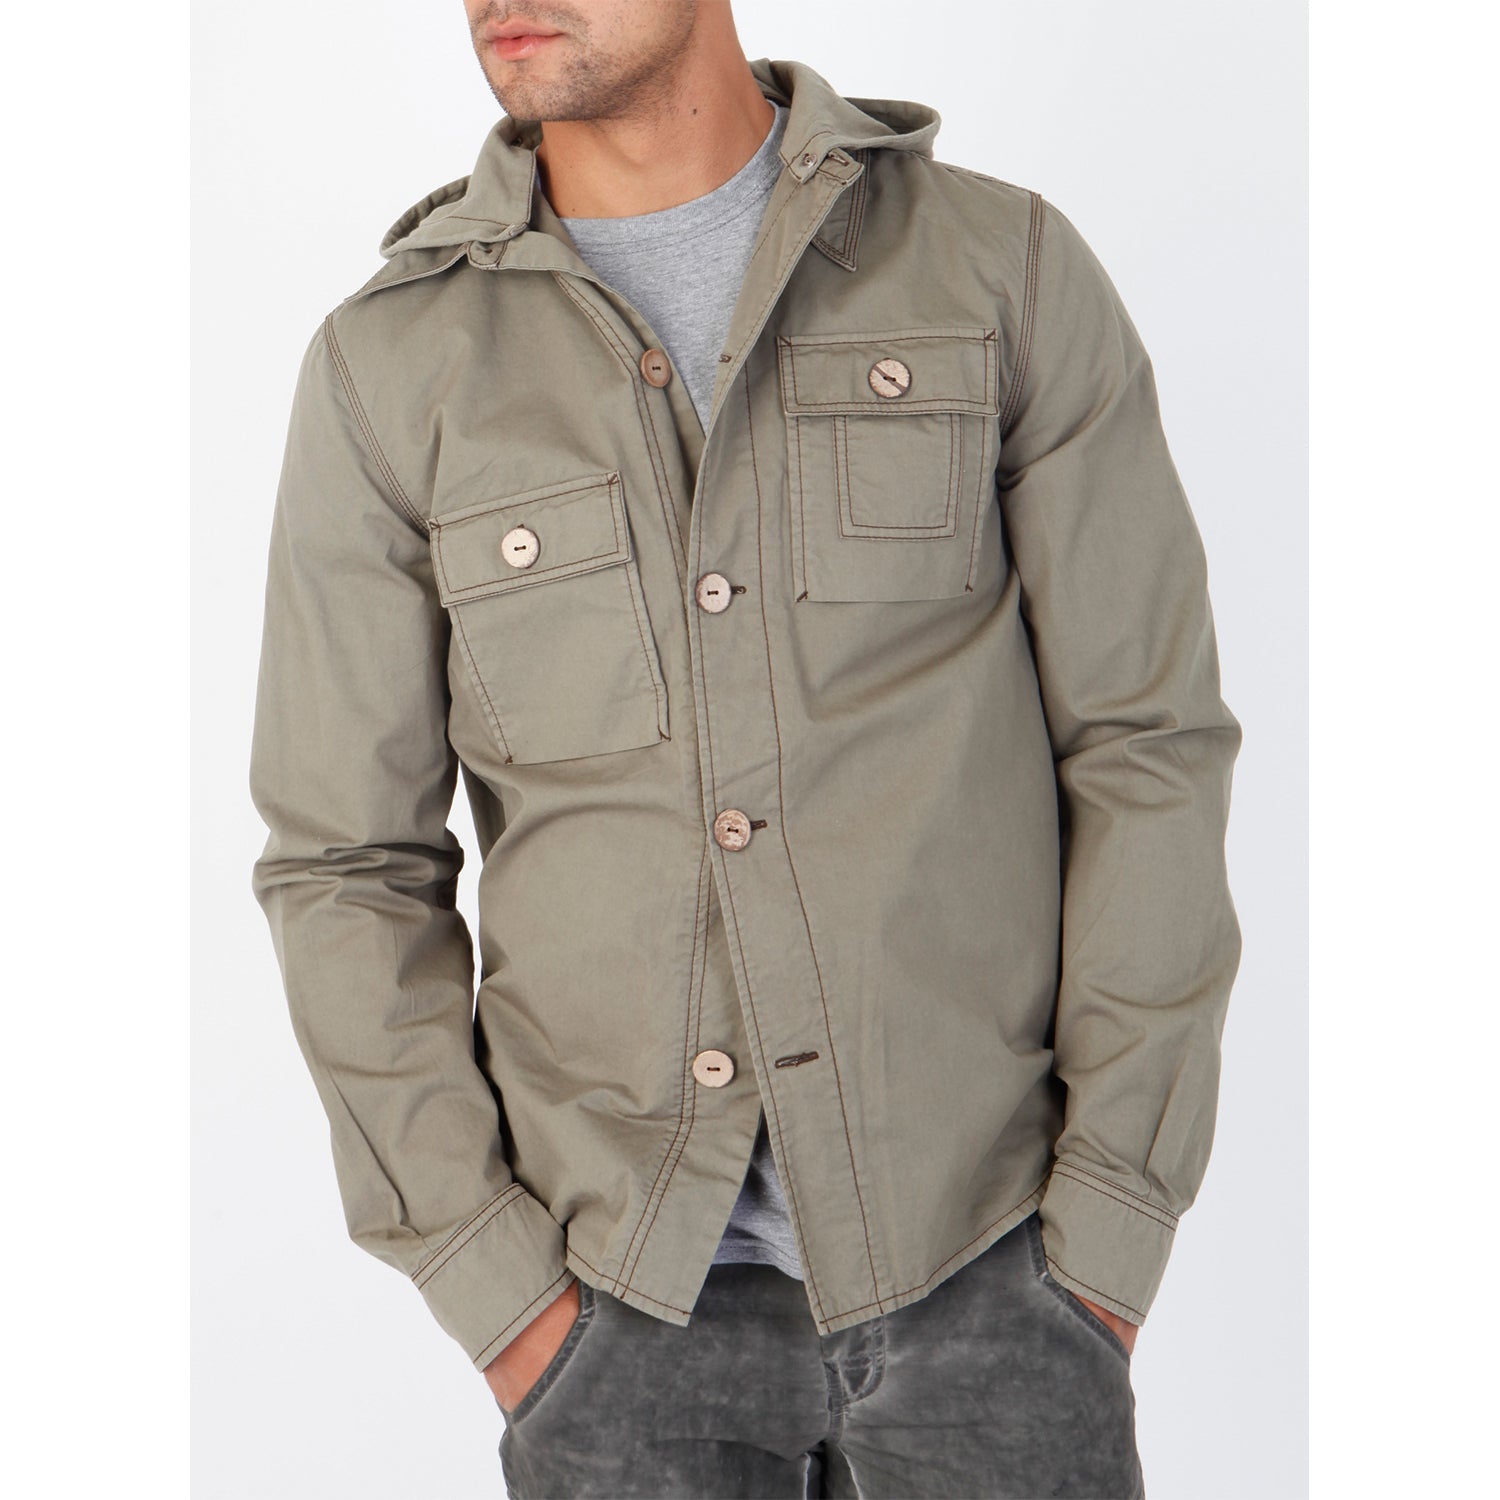 Outer Shirt with Removable Hood